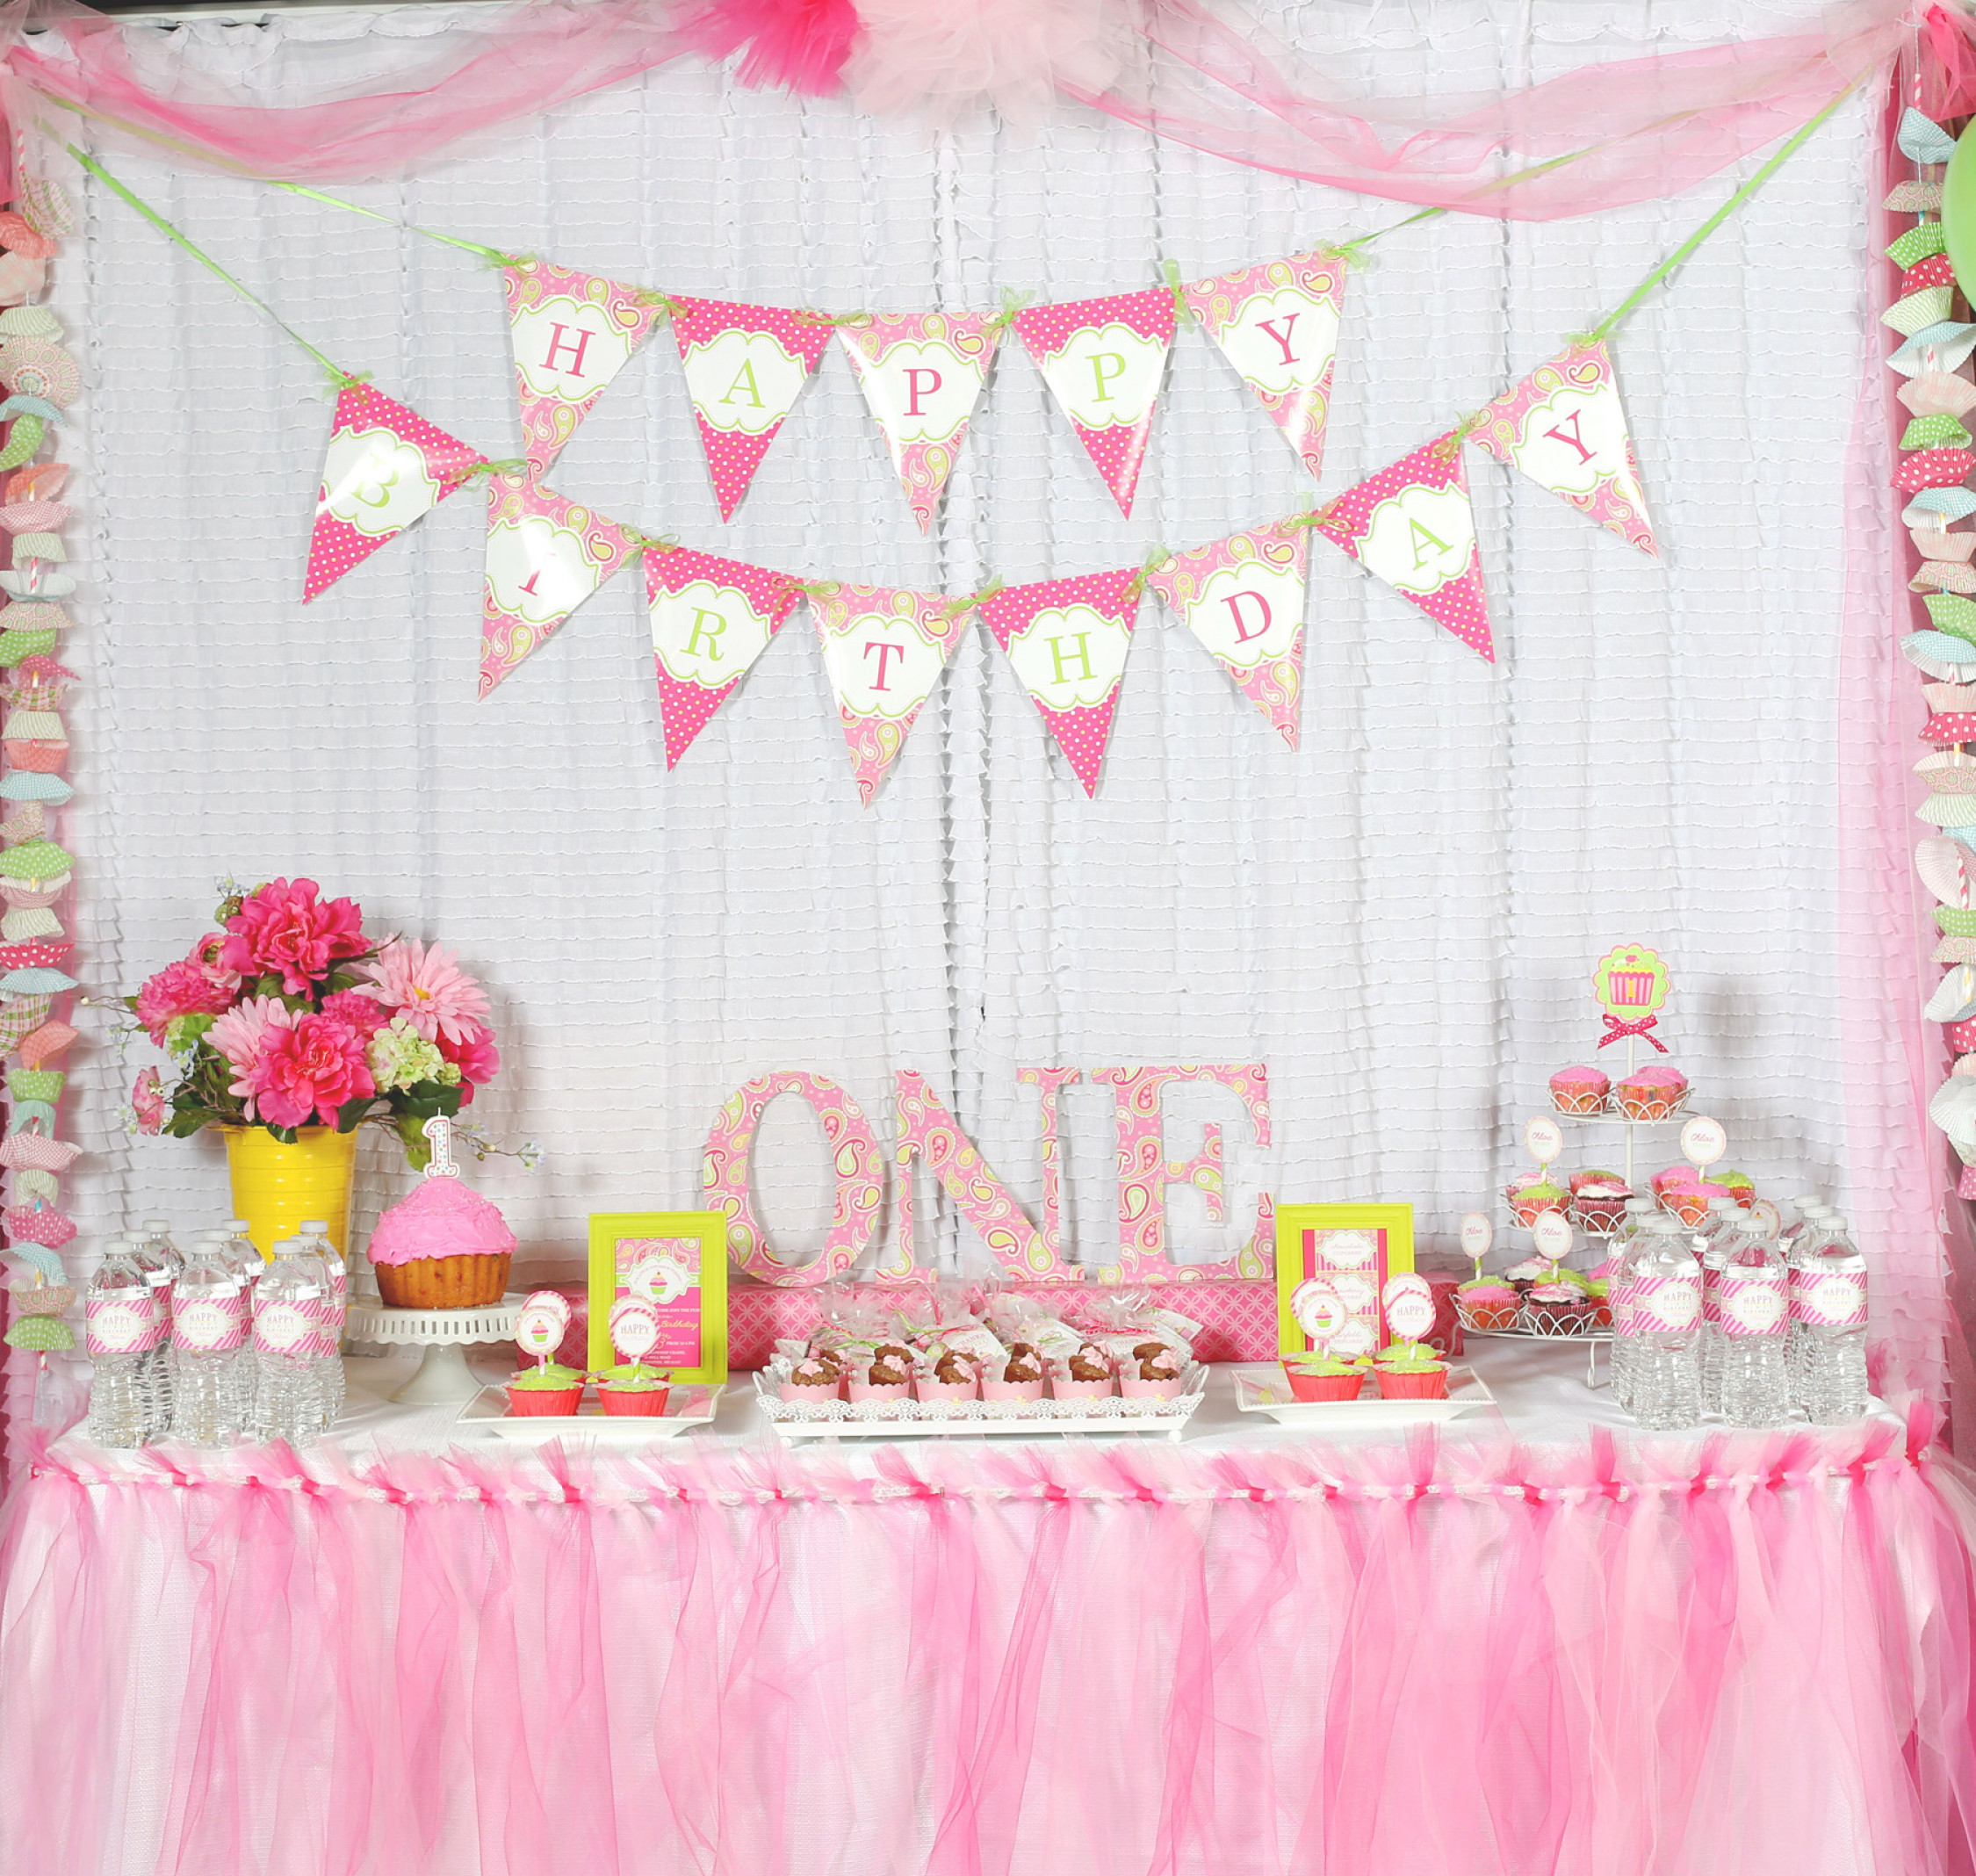 First Birthday Party Theme Ideas
 A Cupcake Themed 1st Birthday party with Paisley and Polka